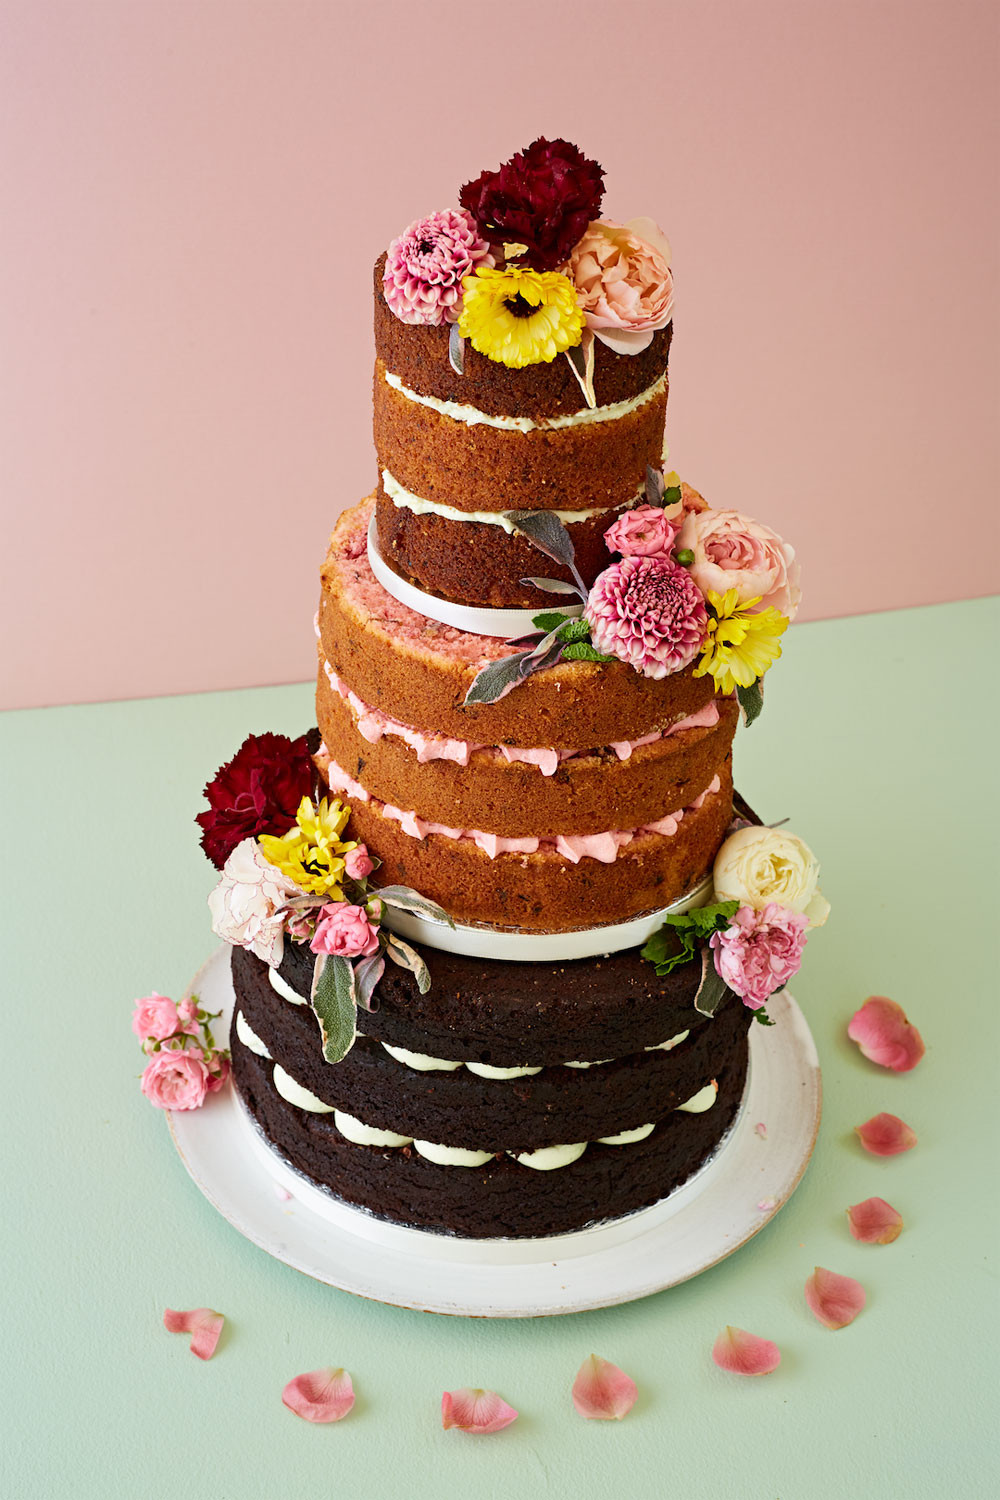 How To Decorate Wedding Cakes
 How To Decorate A Wedding Celebration Cake With Edible